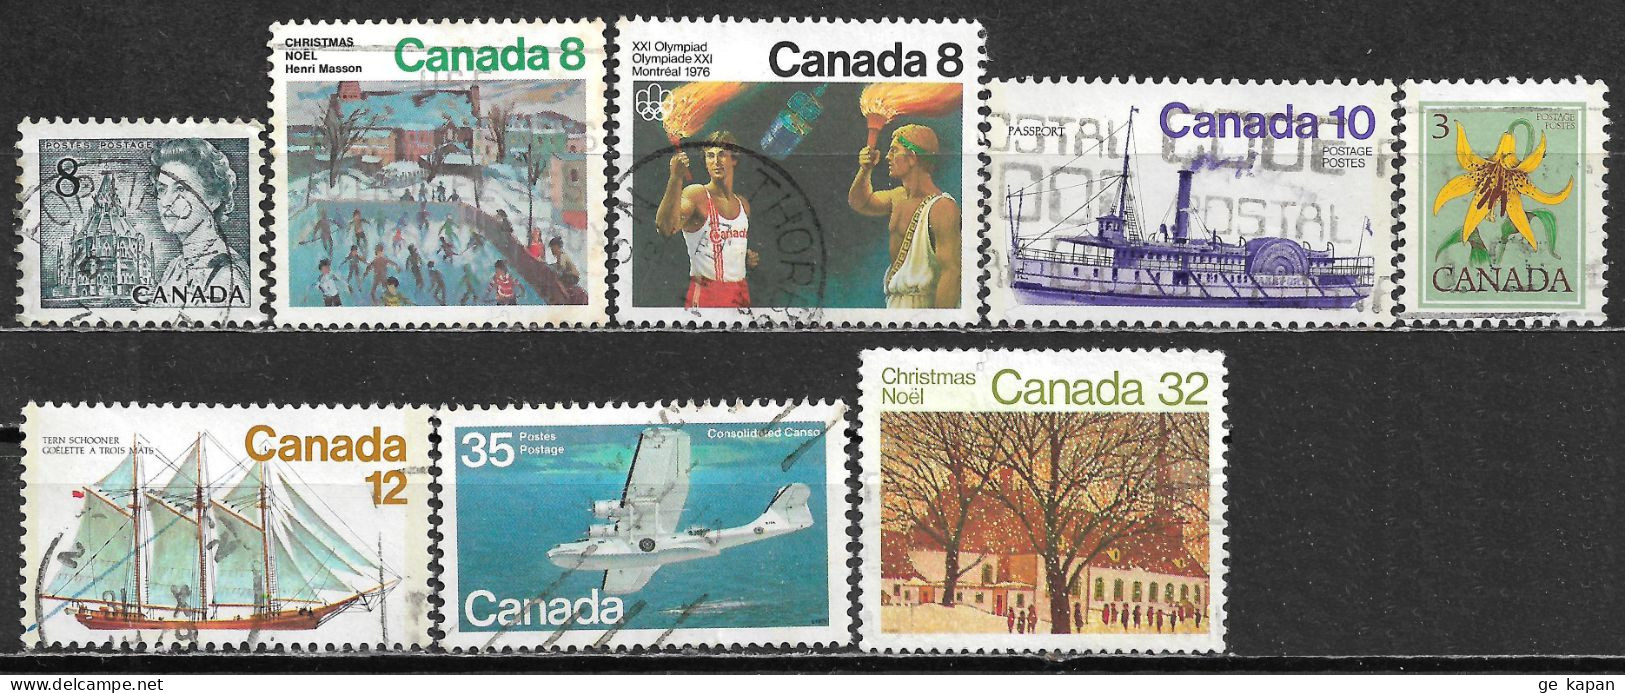 1971-1983 CANADA Set Of 8 USED Stamps (Scott # 544,651,681,701,708,745,846,1004) CV $2.05 - Used Stamps